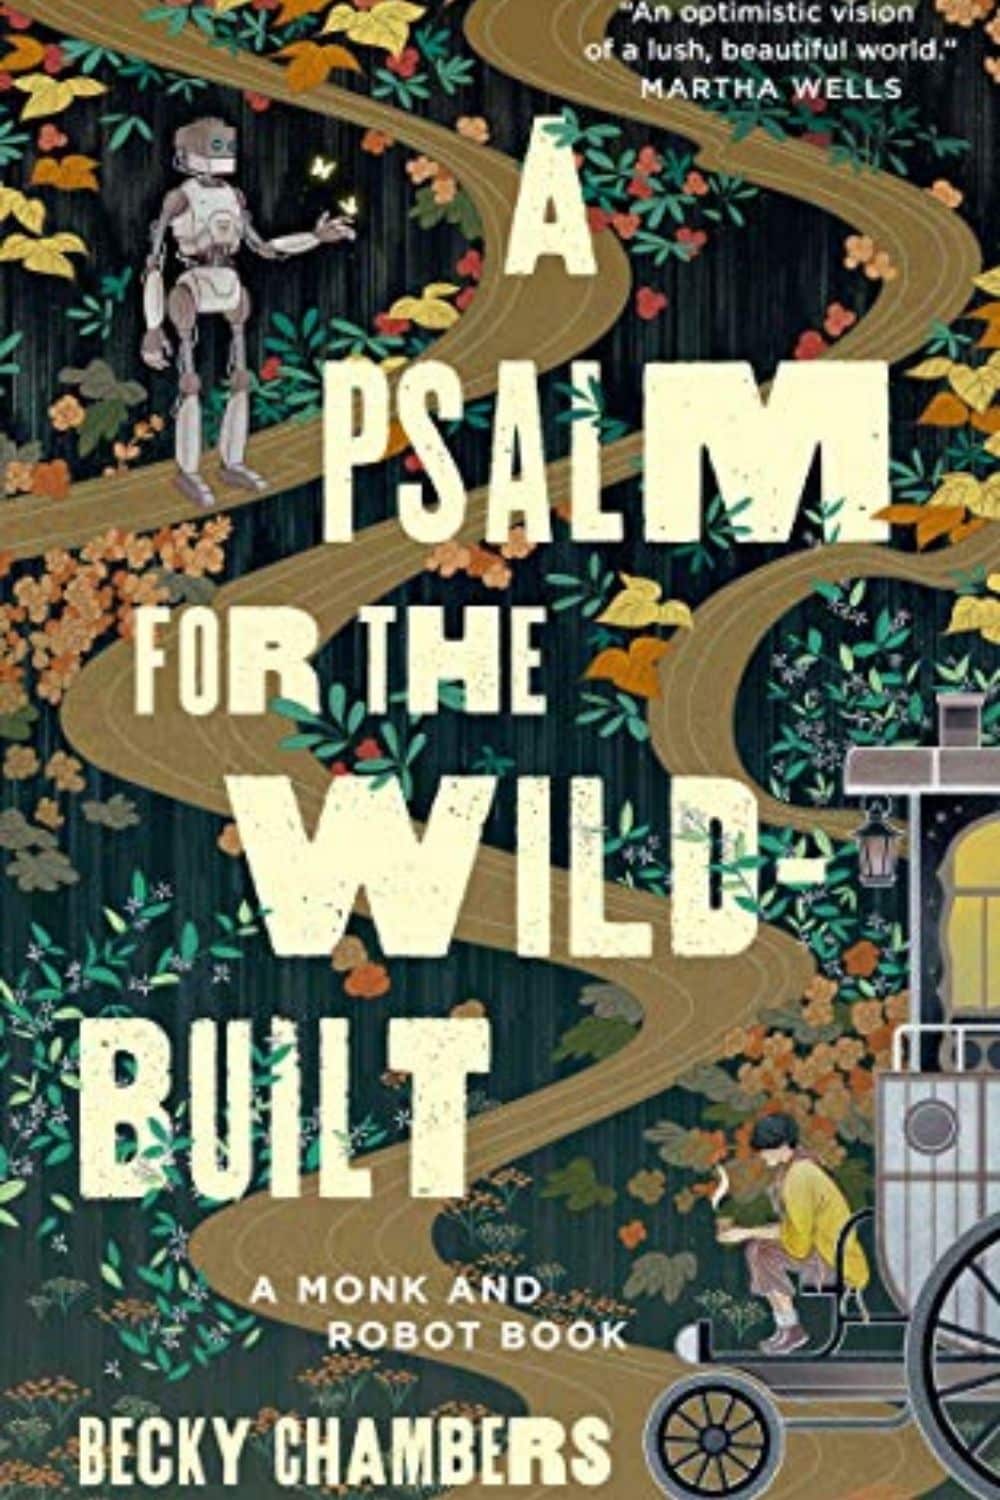 A Psalm For The Wild-Built By Becky Chambers | Monk and Robot